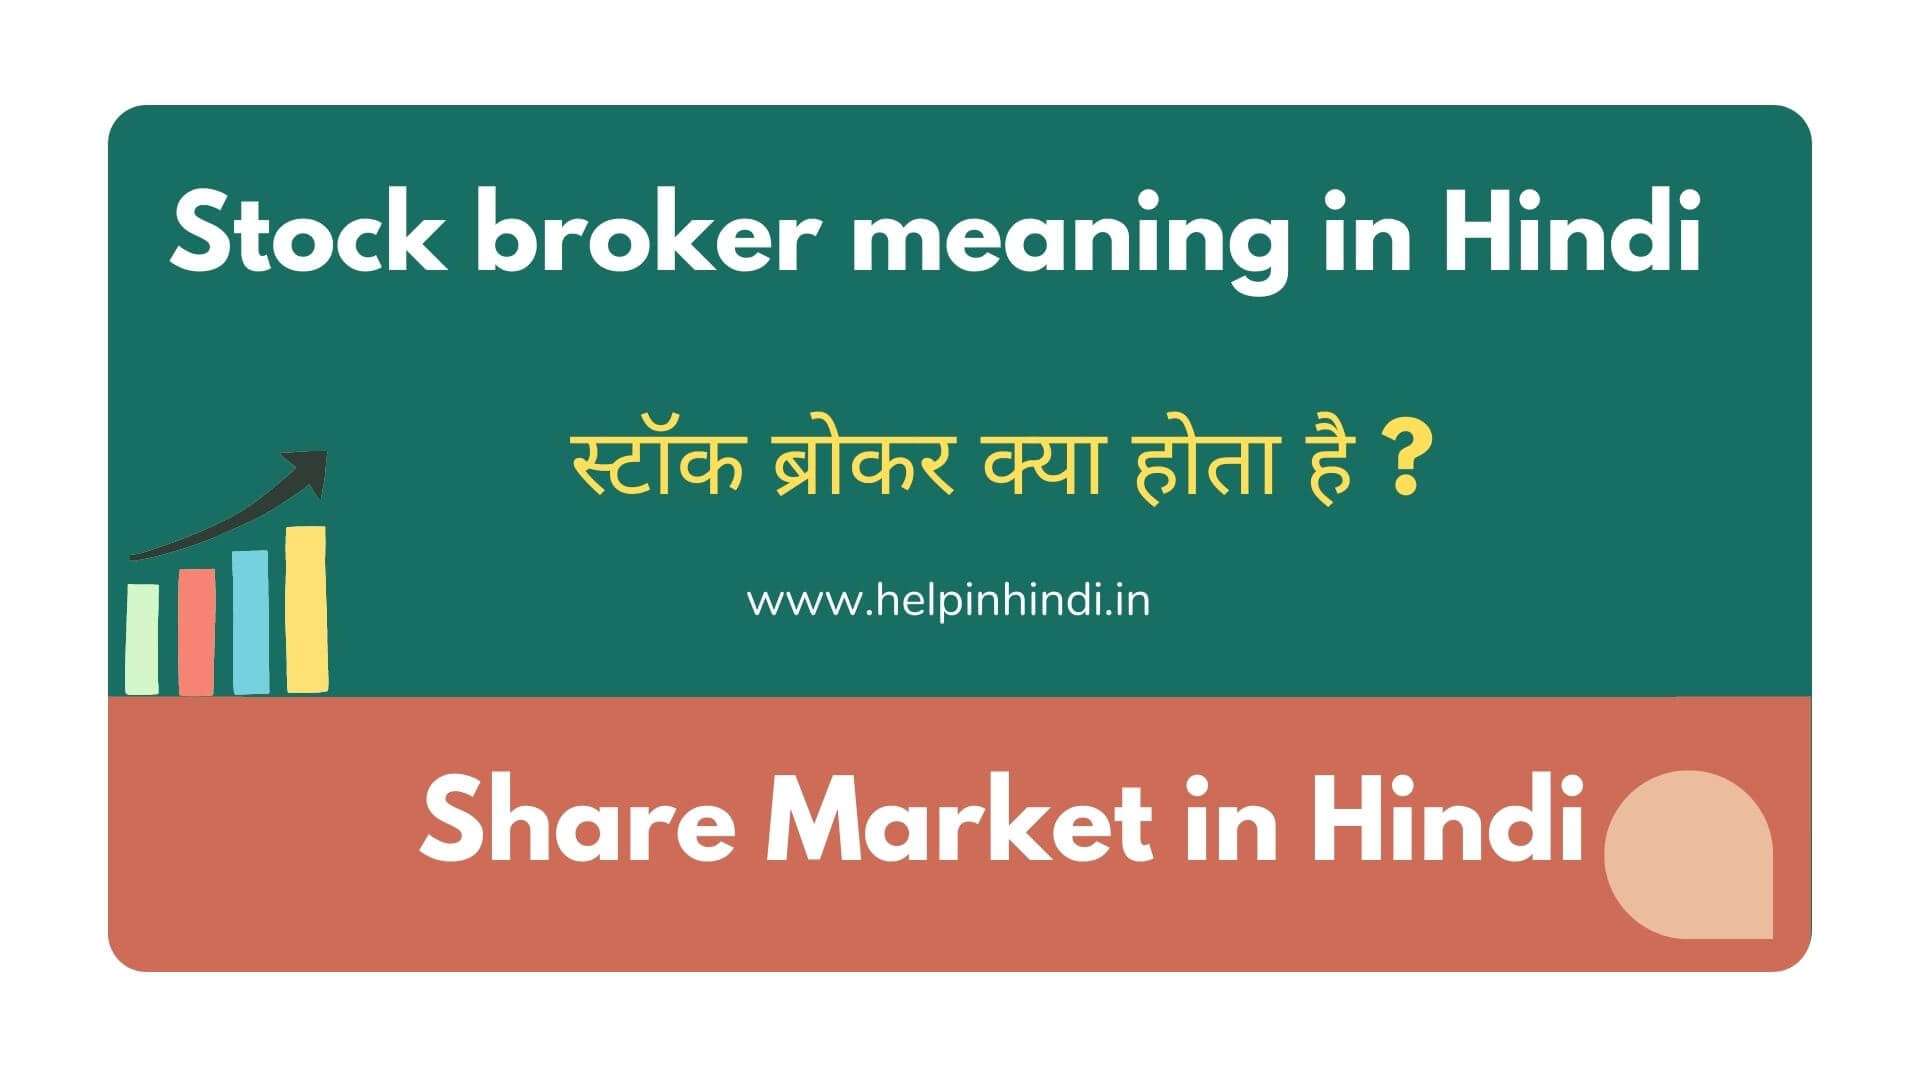 Stock broker meaning in Hindi